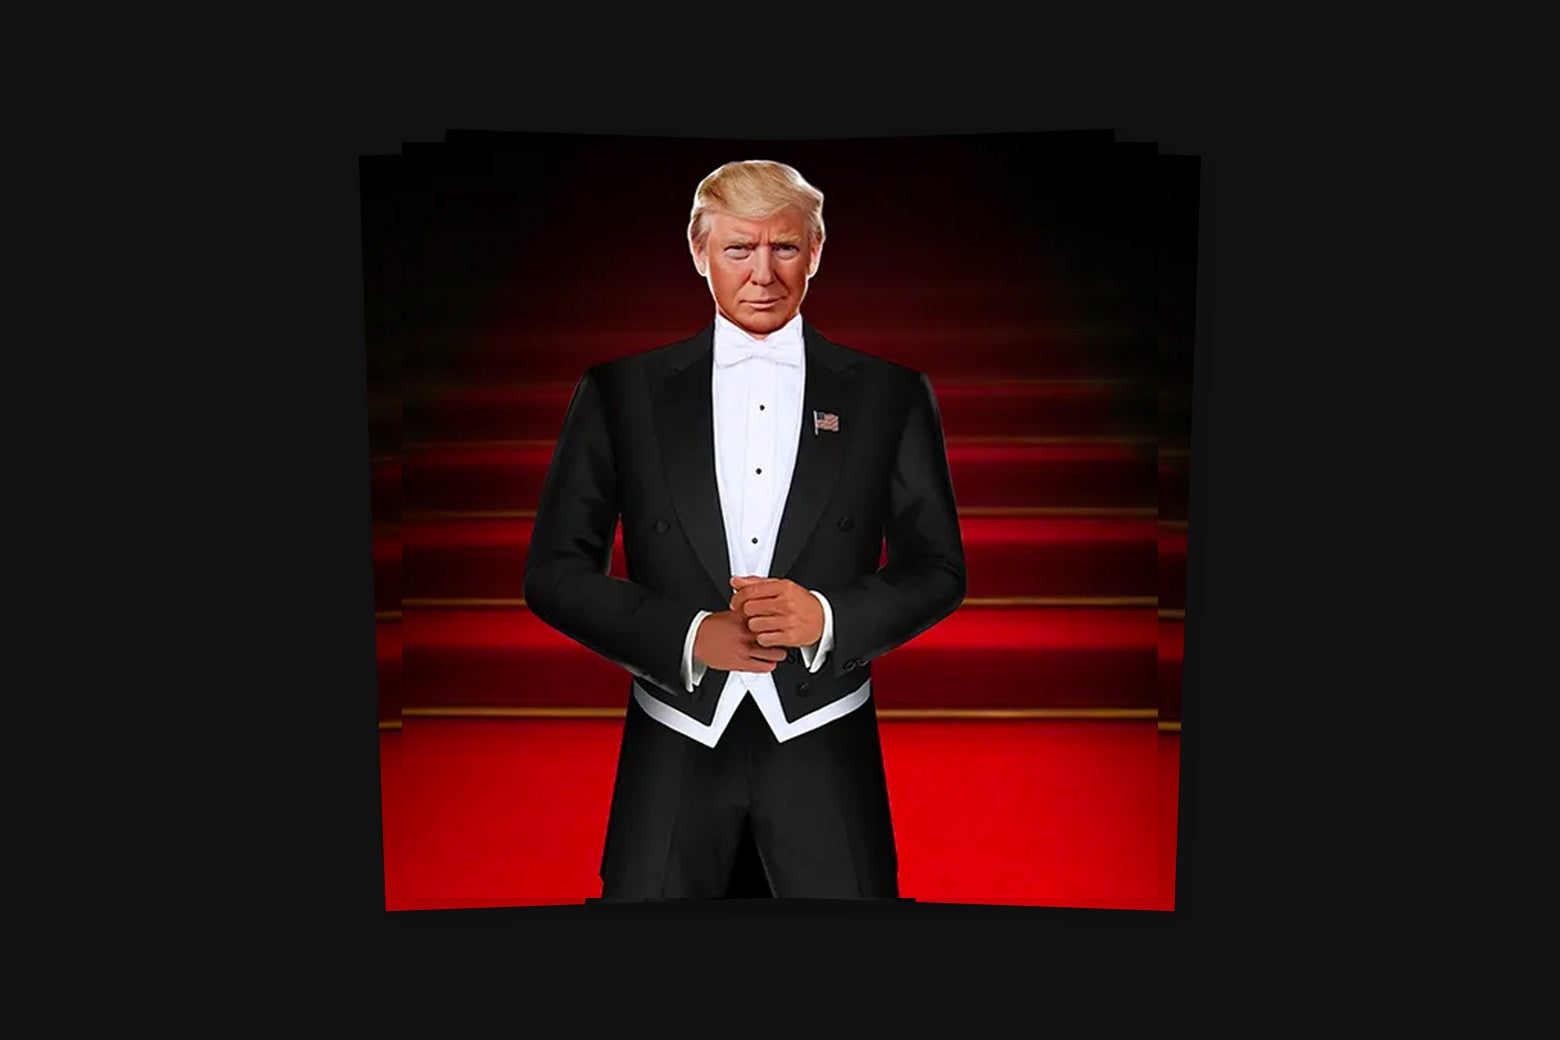 An image in which Trump's head has been placed atop a trim man in a tuxedo standing in front of red, carpeted steps.